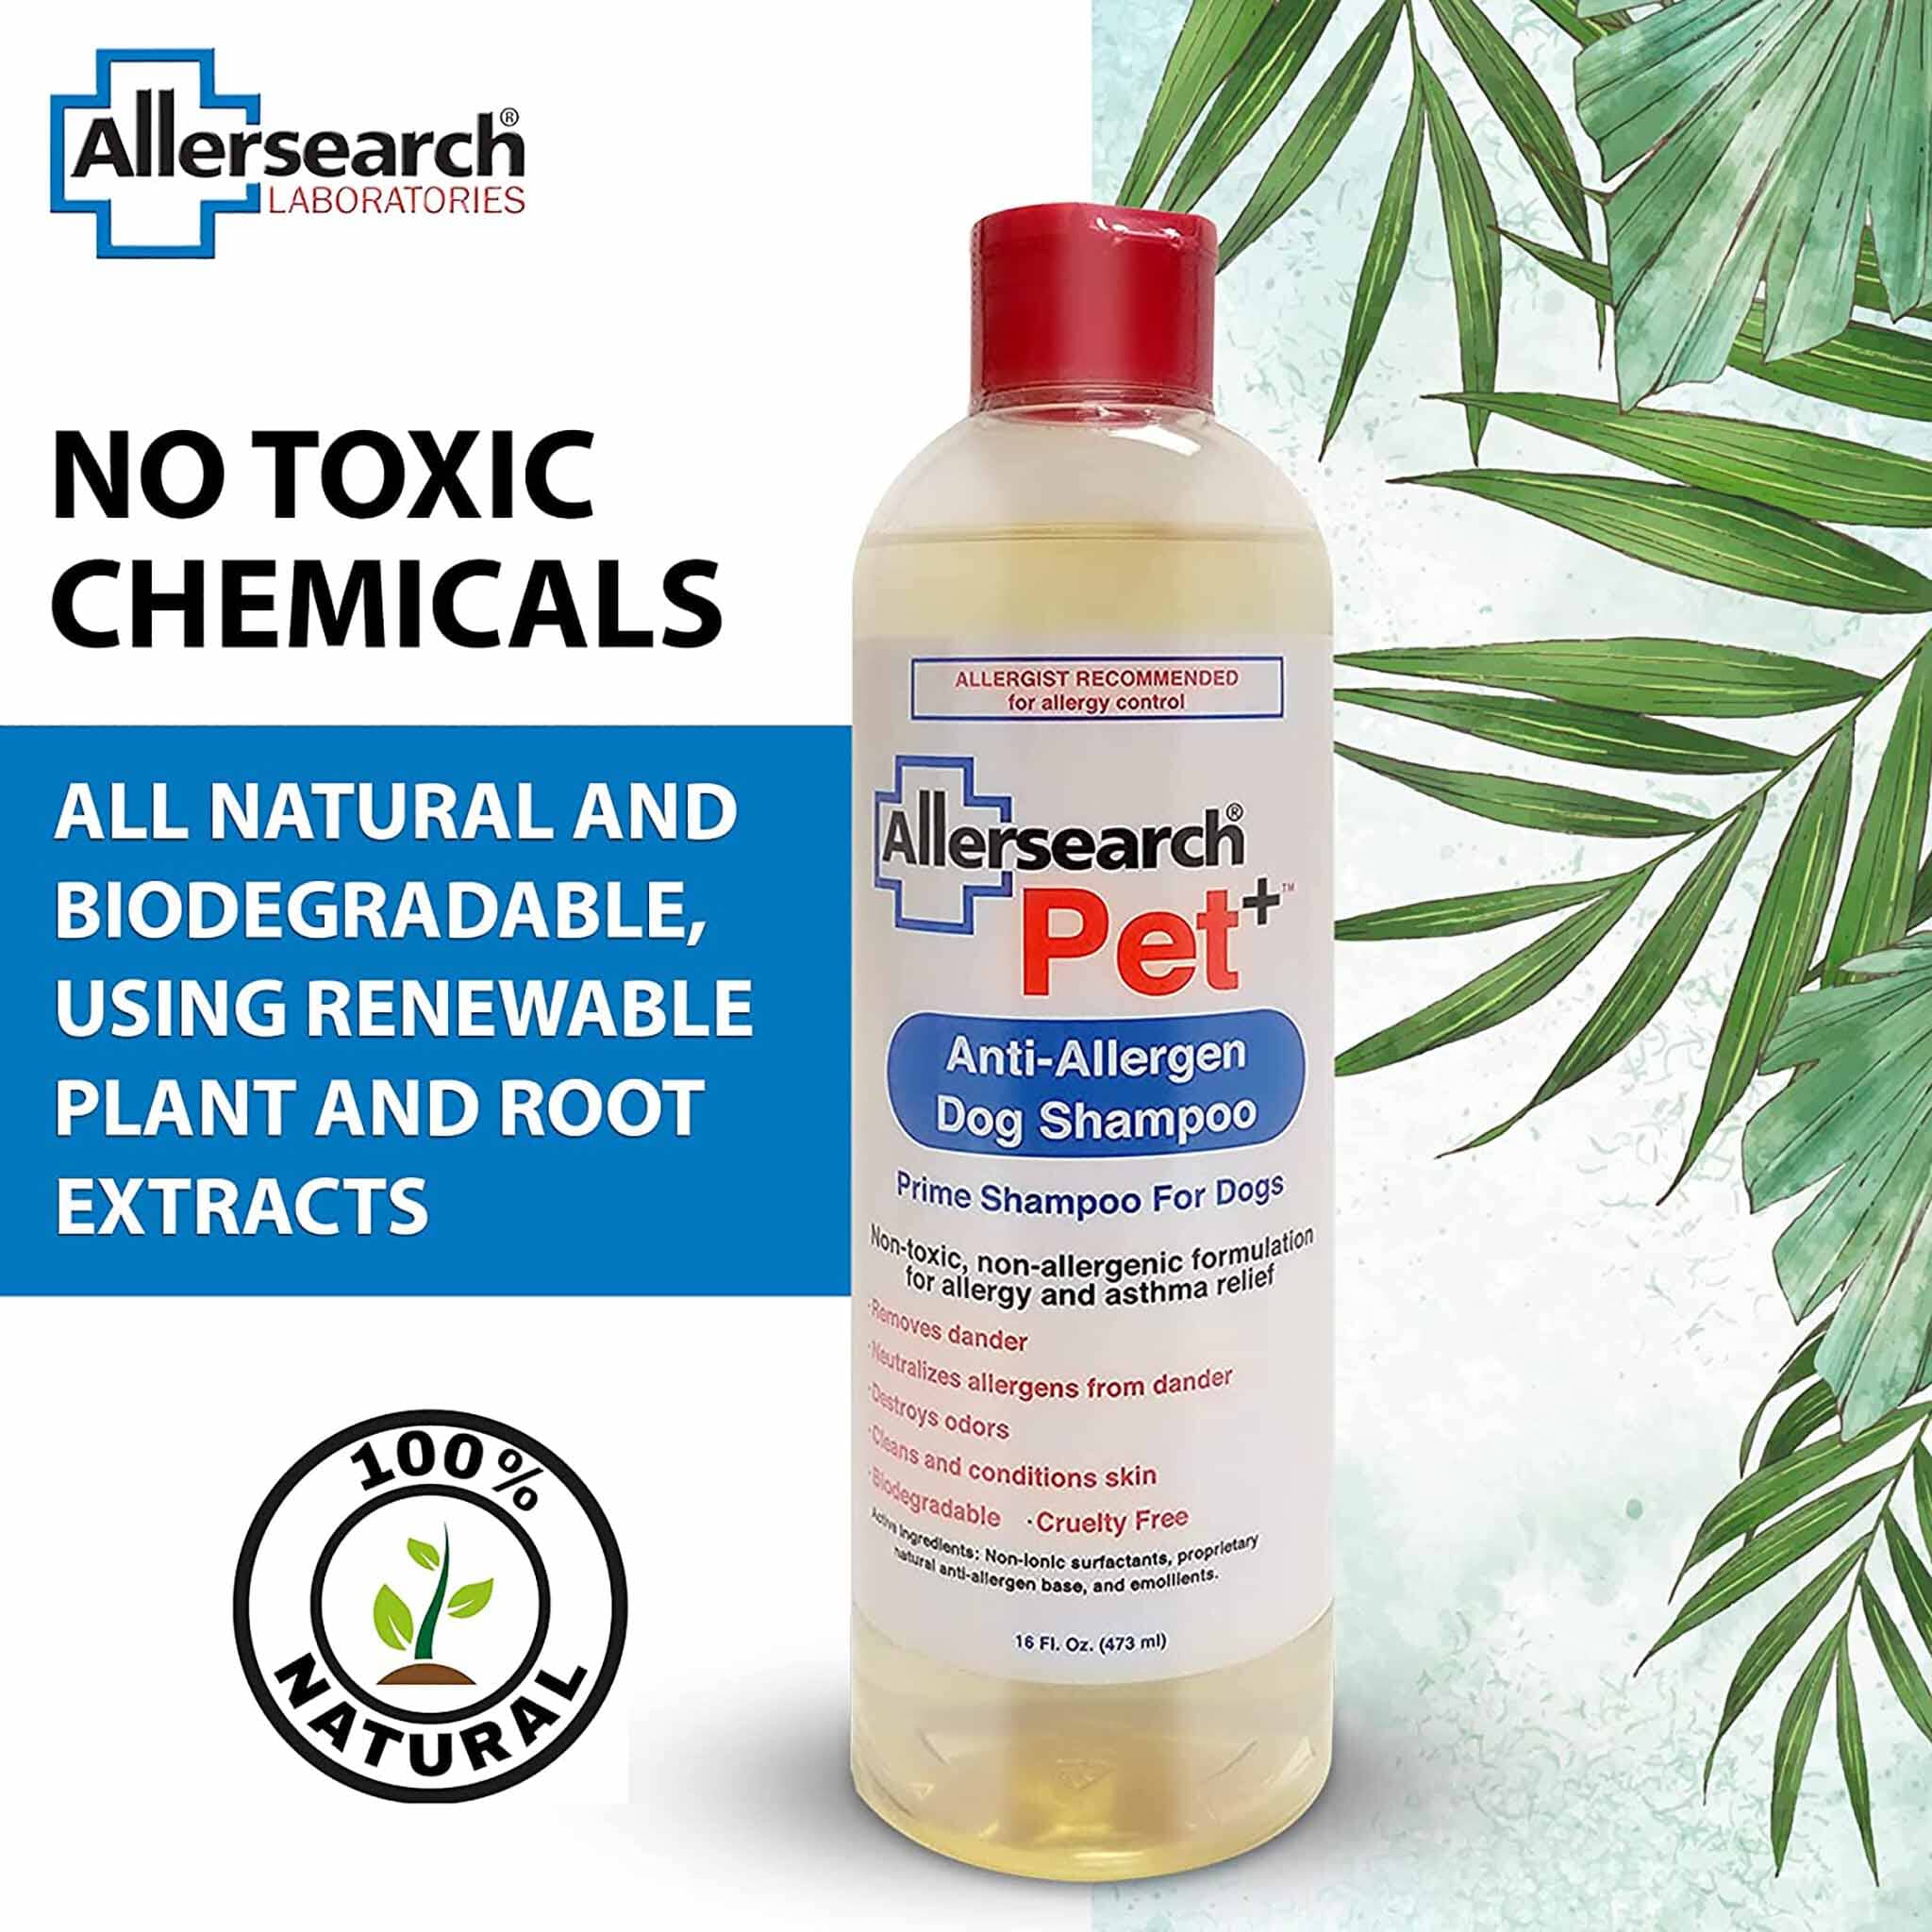 Allersearch Pet+ Dog Shampoo - All Natural